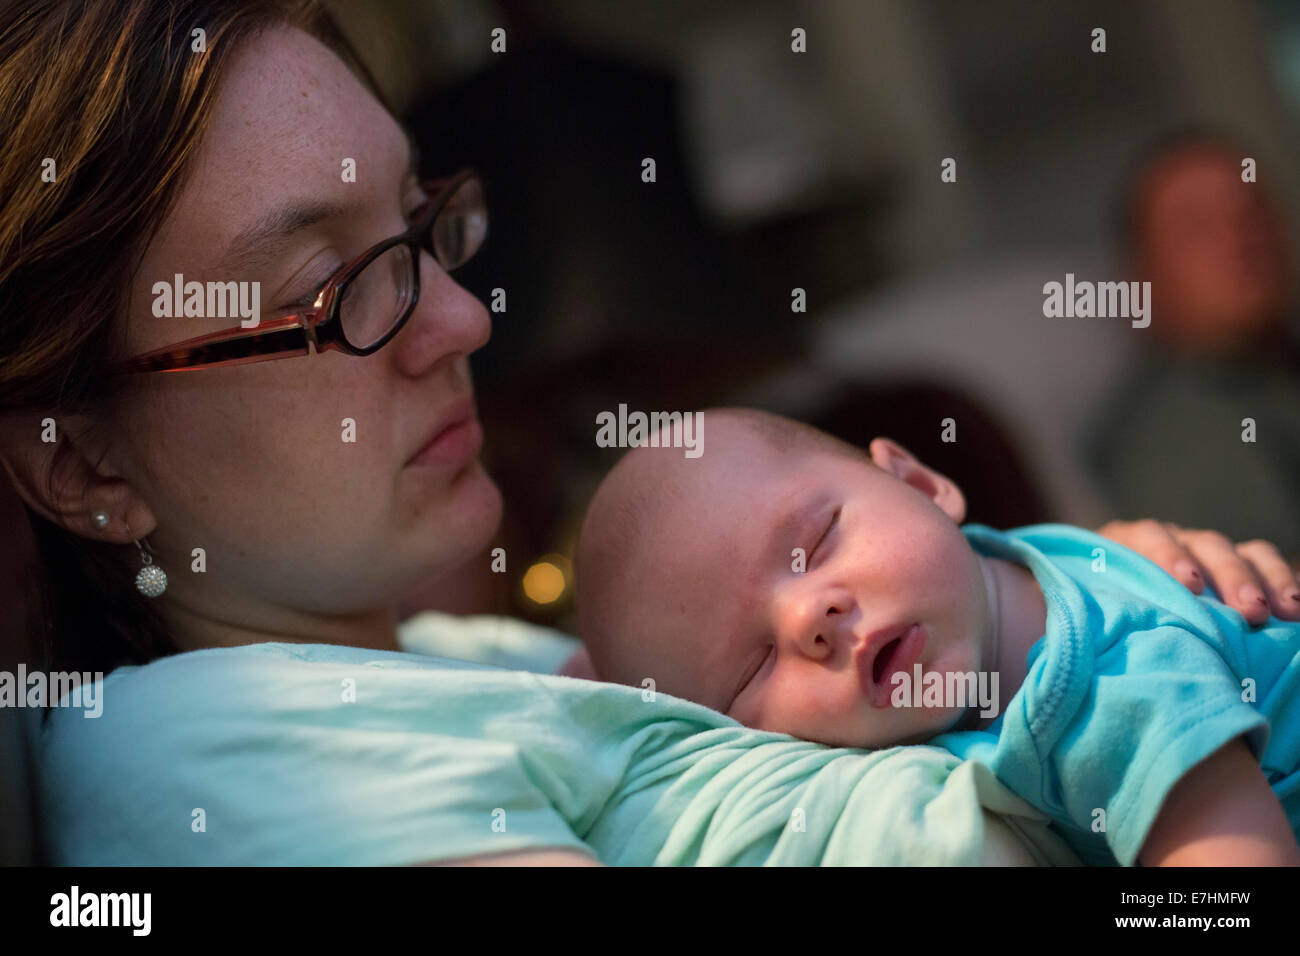 Denver, Colorado - A two-month-old baby sleeps, held by his mother. Stock Photo